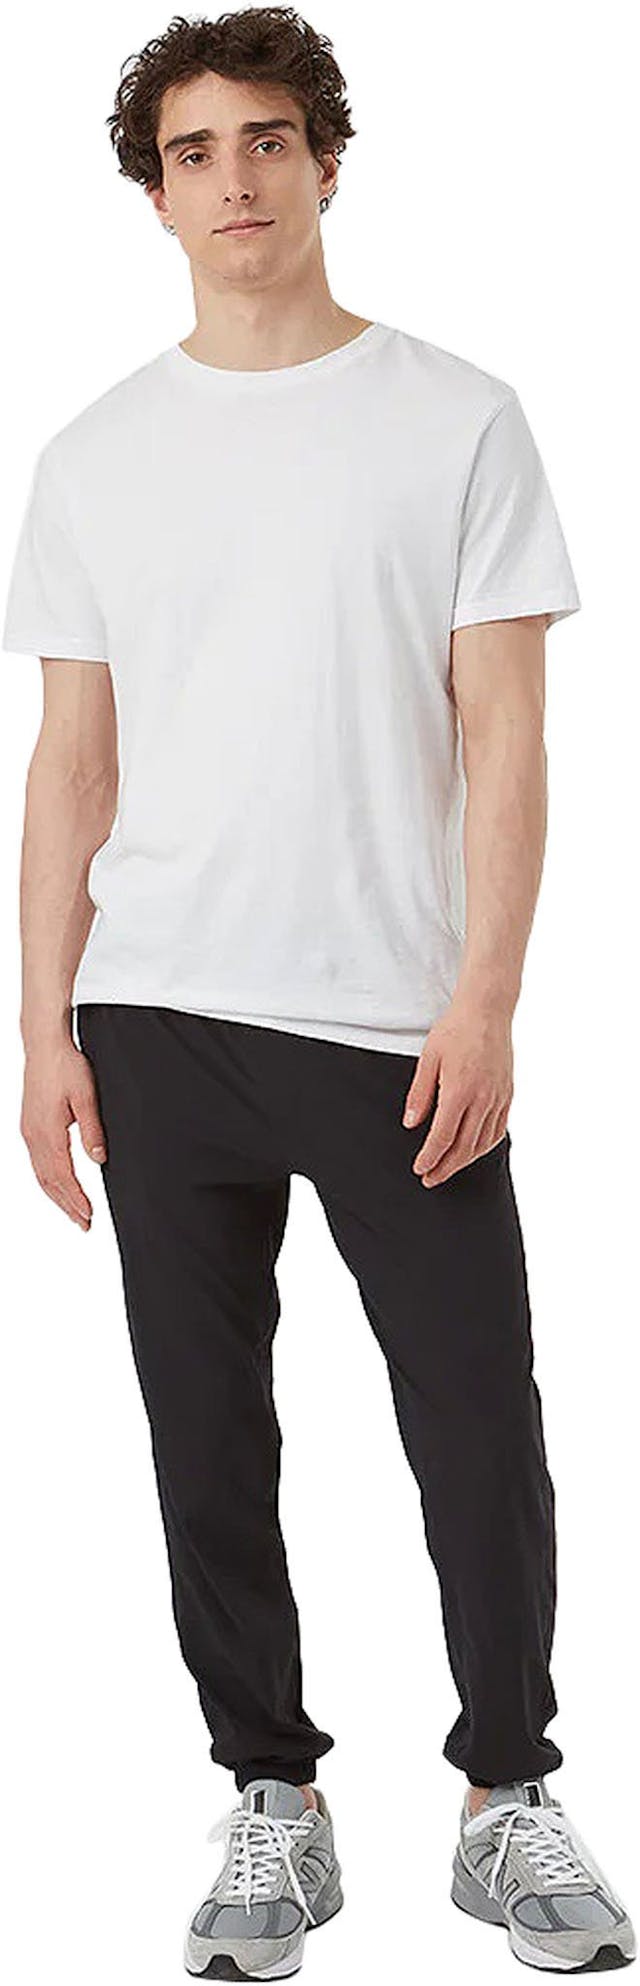 Product image for InMotion Track Jogger - Men's